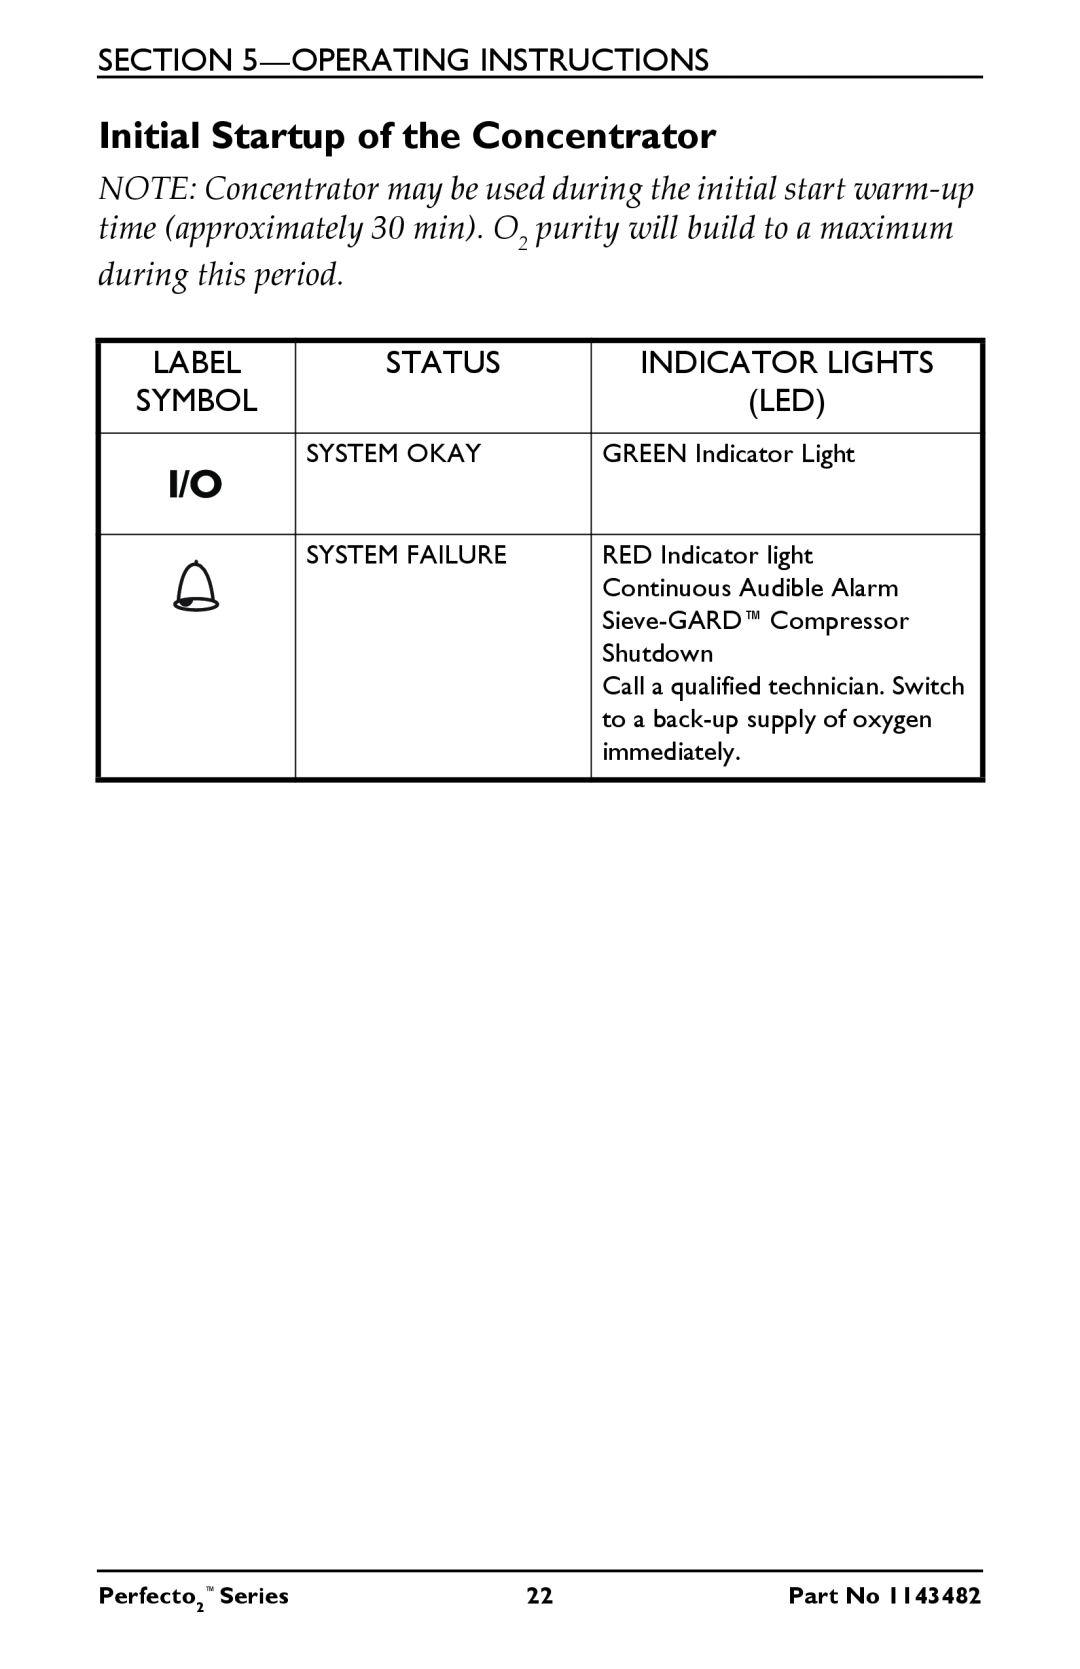 Invacare IRC5PO2W Status, Indicator Lights, Initial Startup of the Concentrator, Operatinginstructions, Symbol, Label 